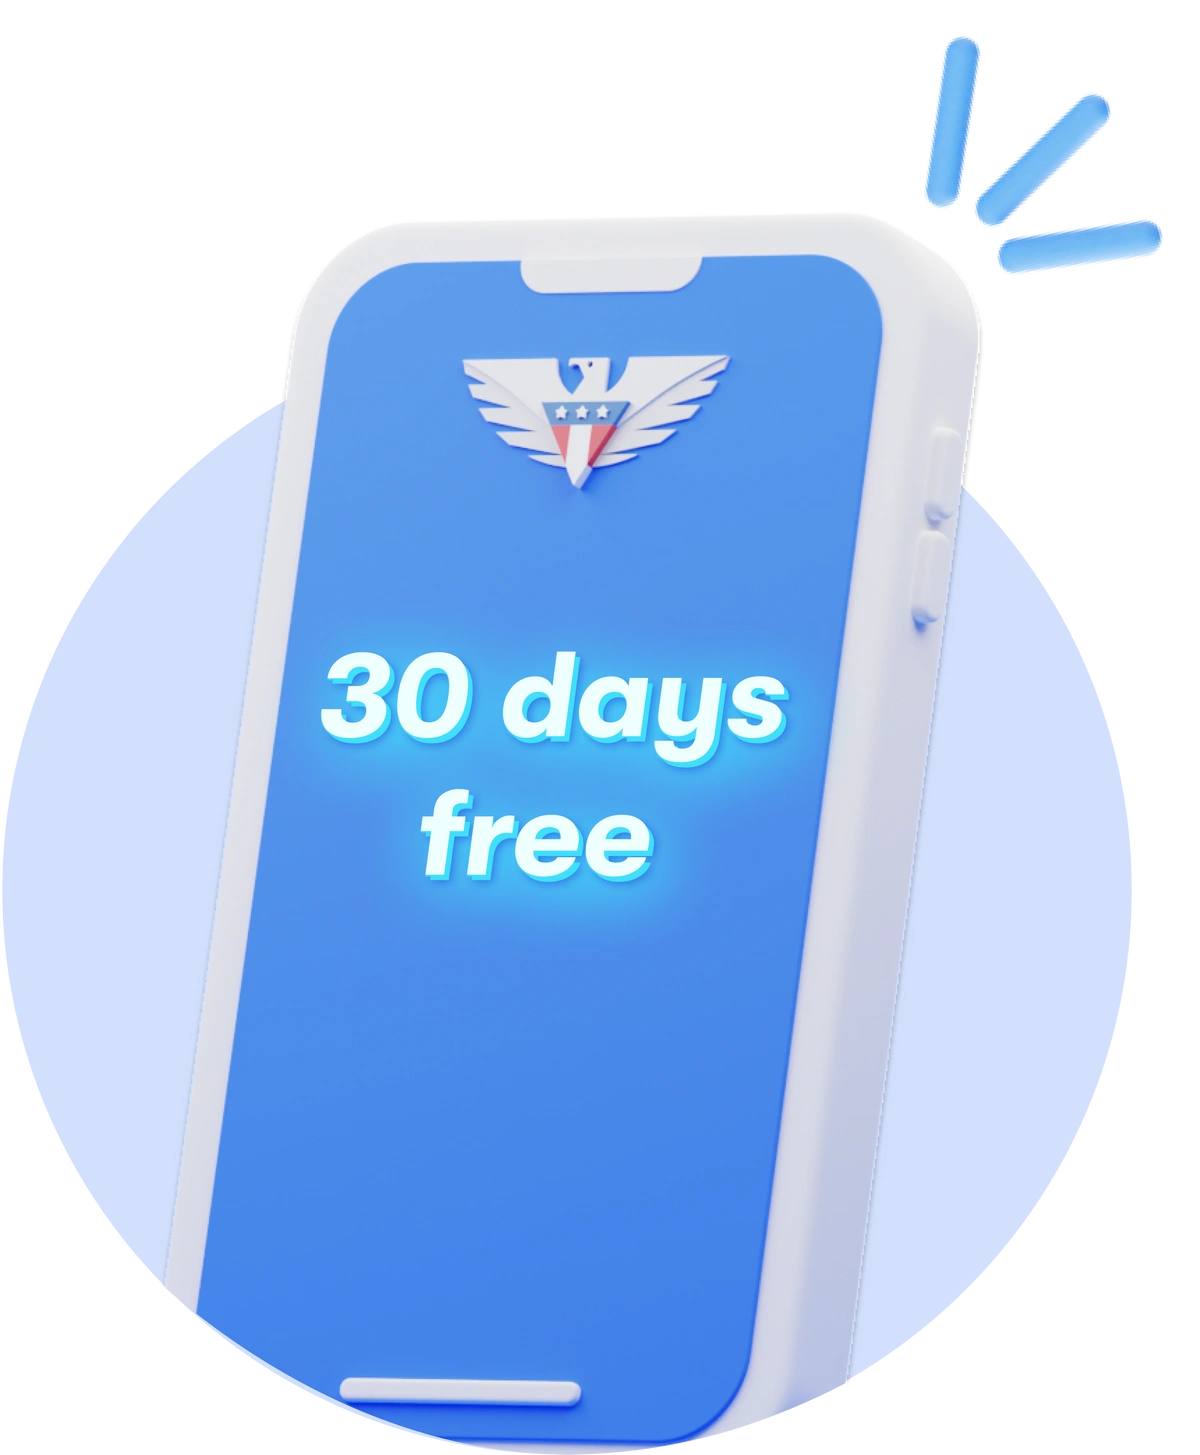 Phone with US Mobile logo displaying the 30 day free trial